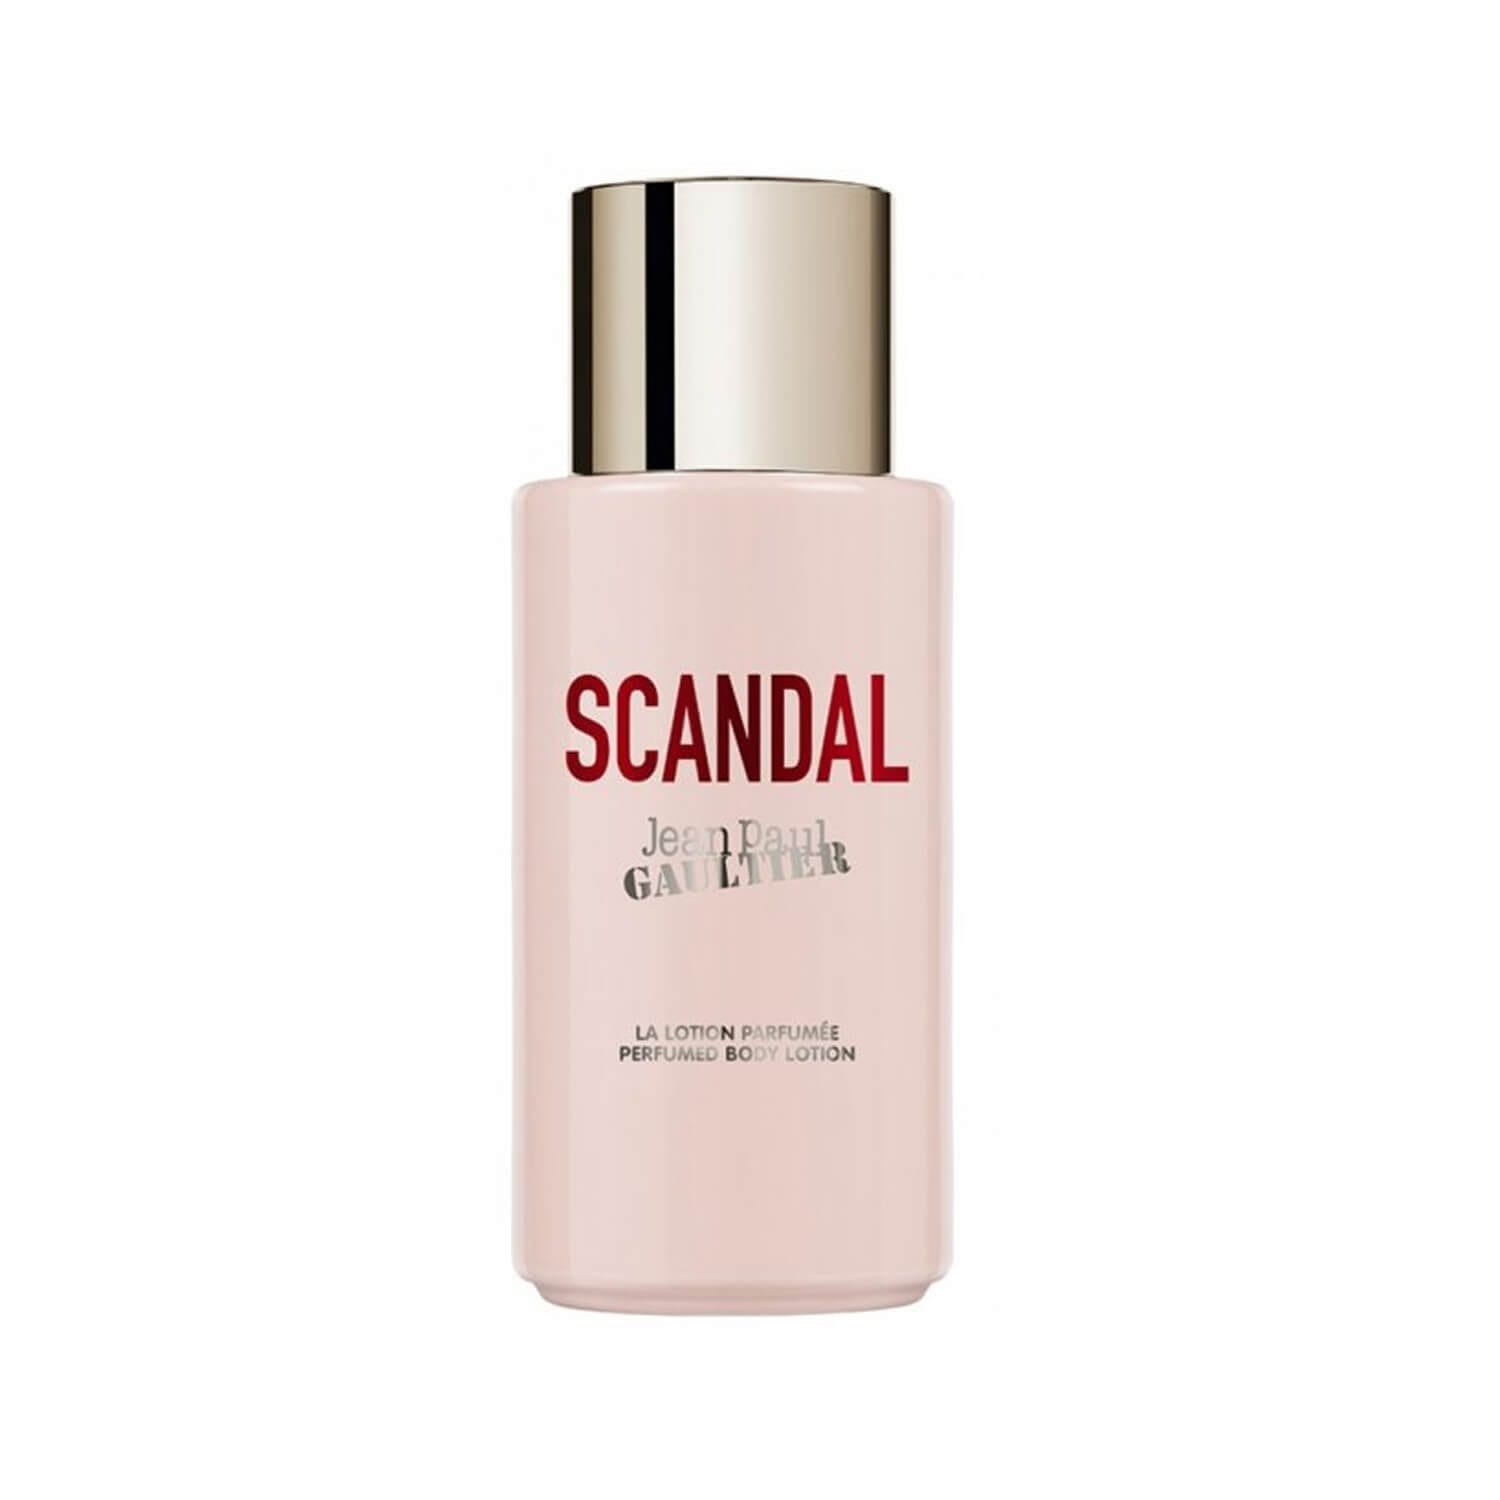 Scandal Body Lotion | The Glam Edition